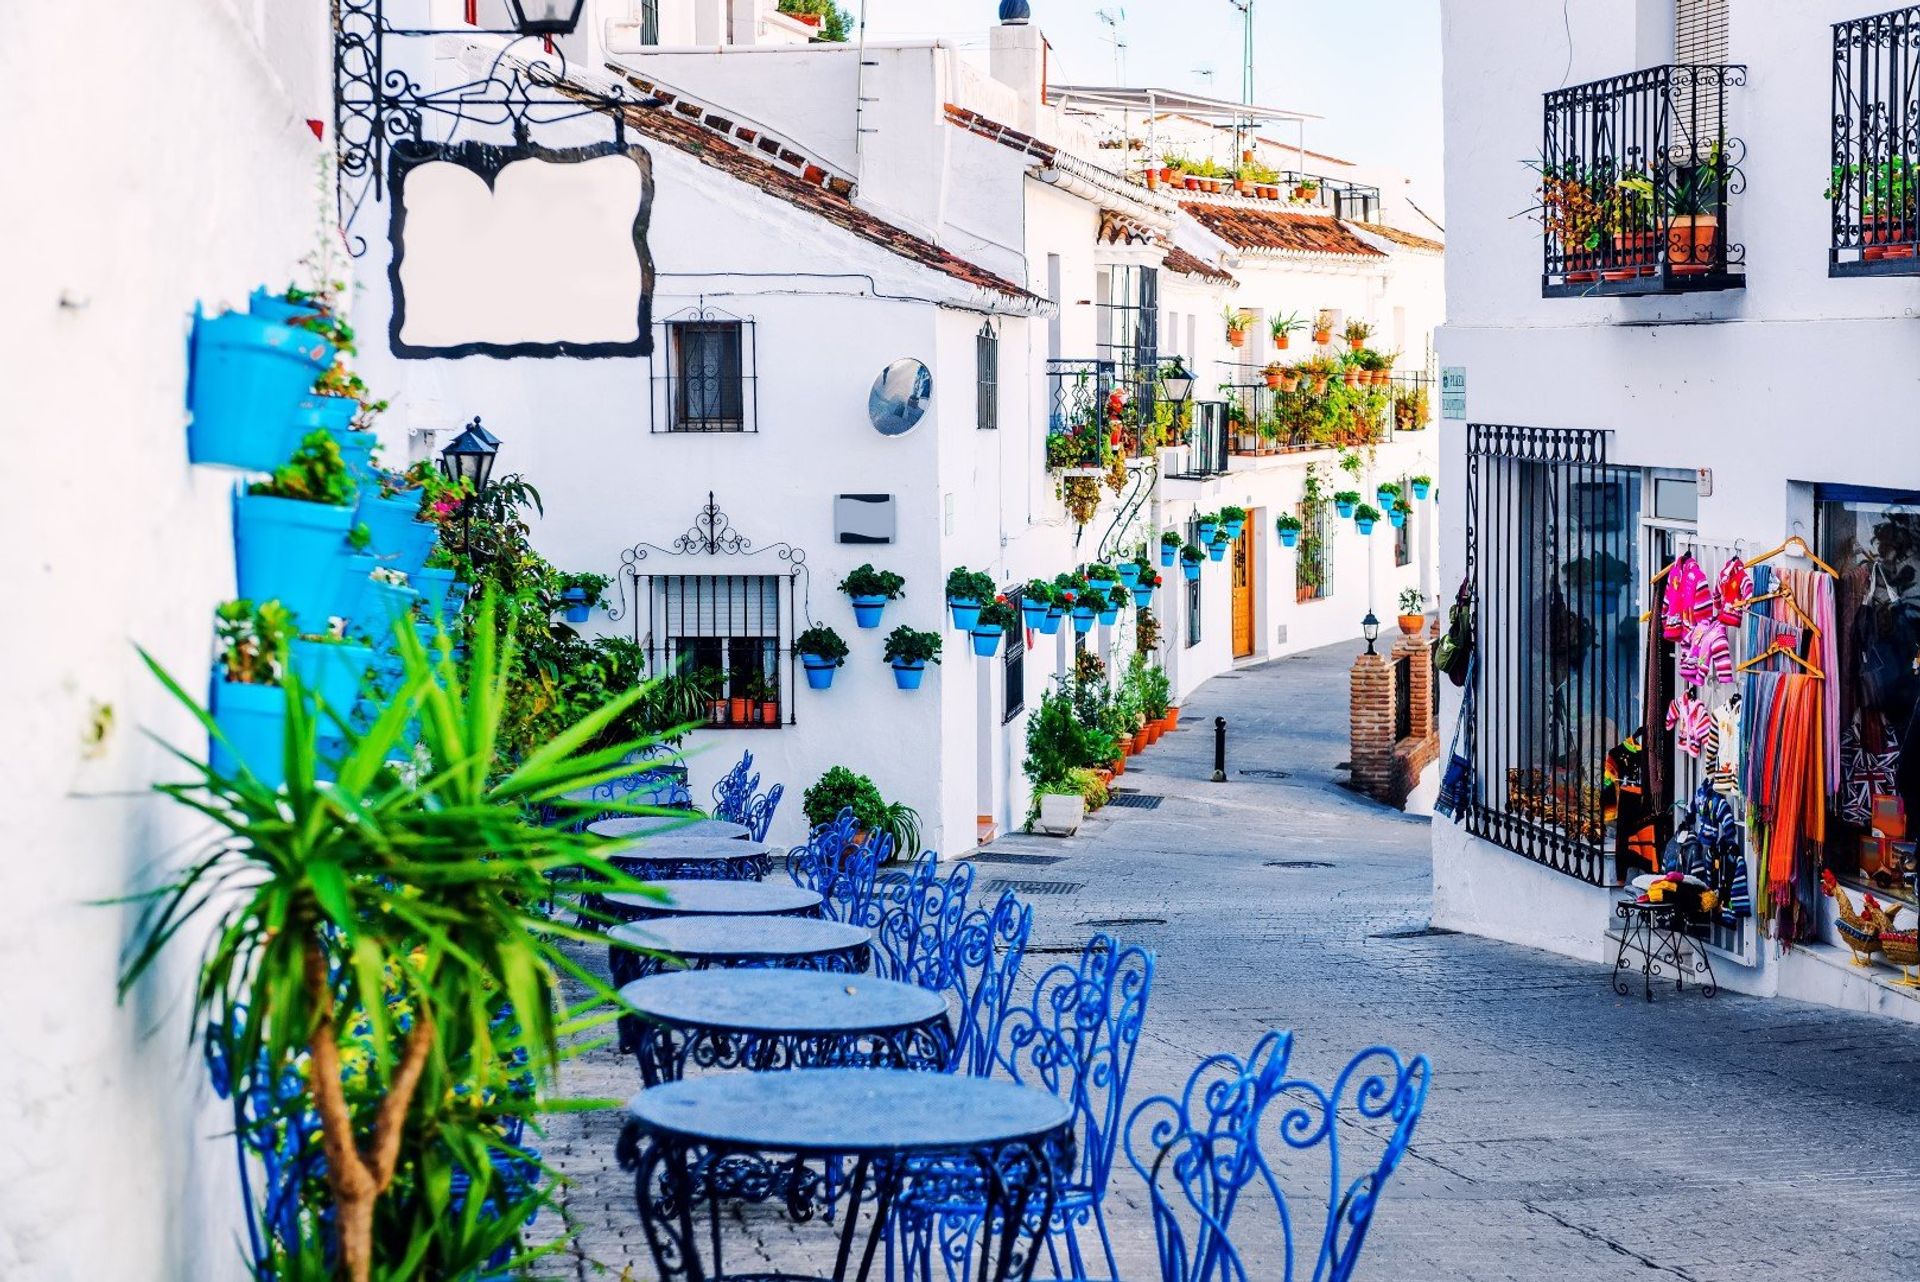 Take in the authentic Spanish charm with a stroll around the old villages dotted along the Costa del Sol